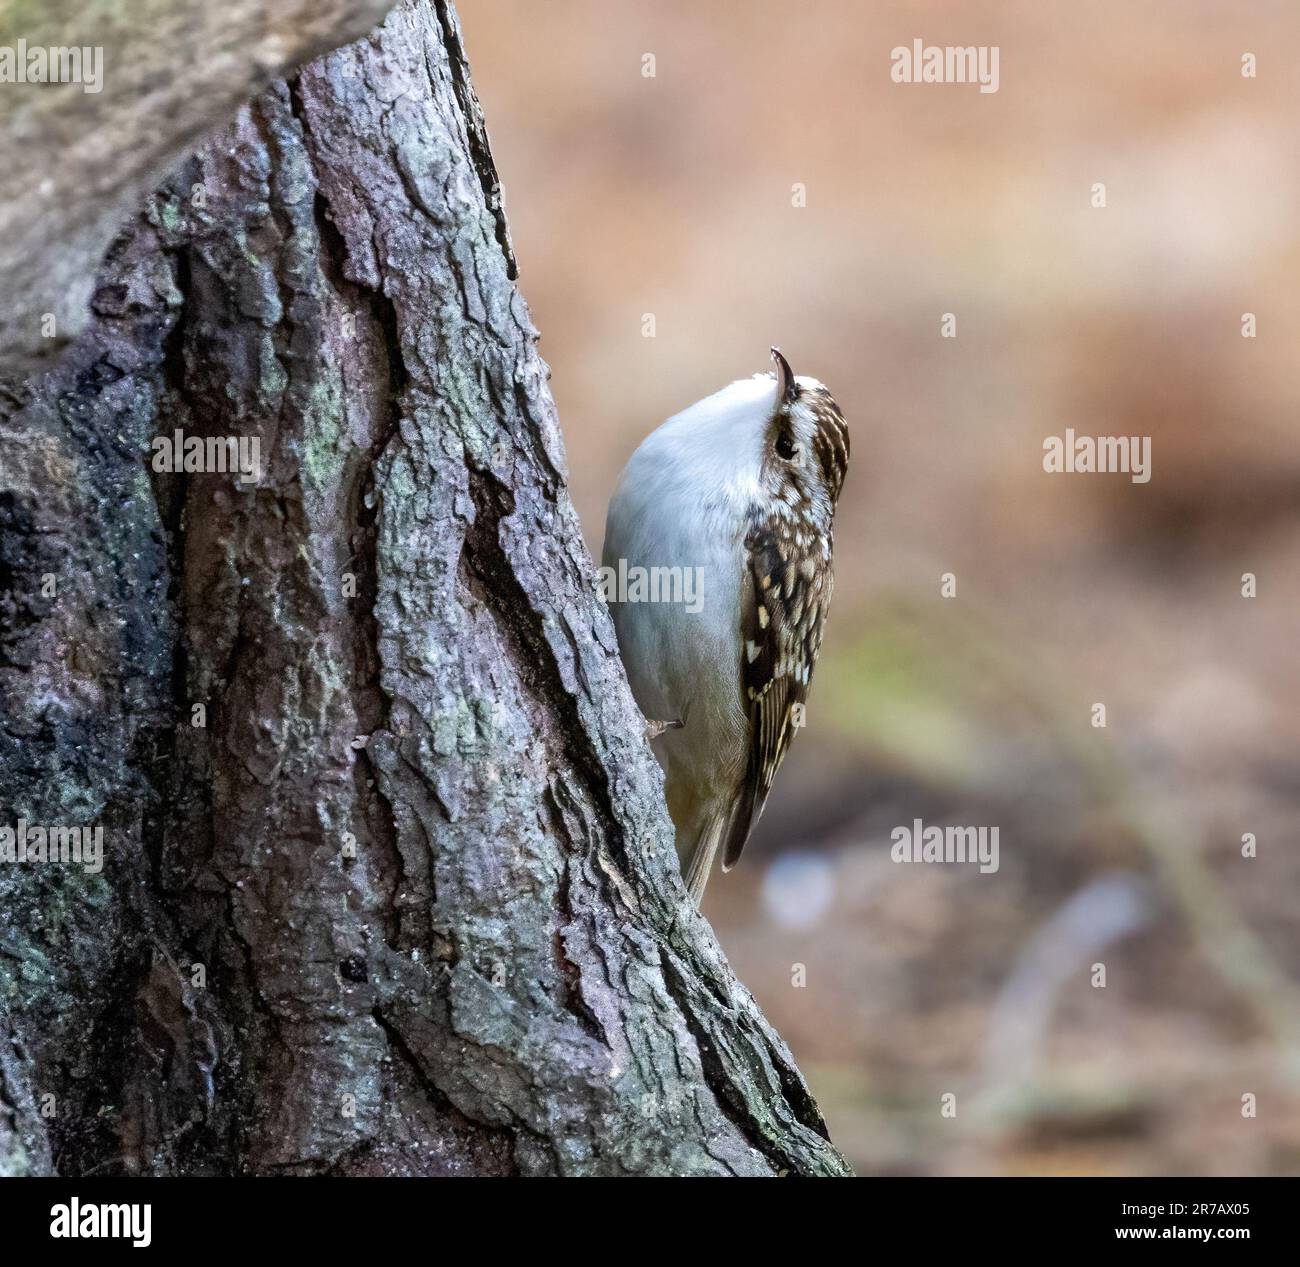 A tree creeper bird stands on a tree trunk, its tiny claws gripping the bark as it surveys its surroundings Stock Photo